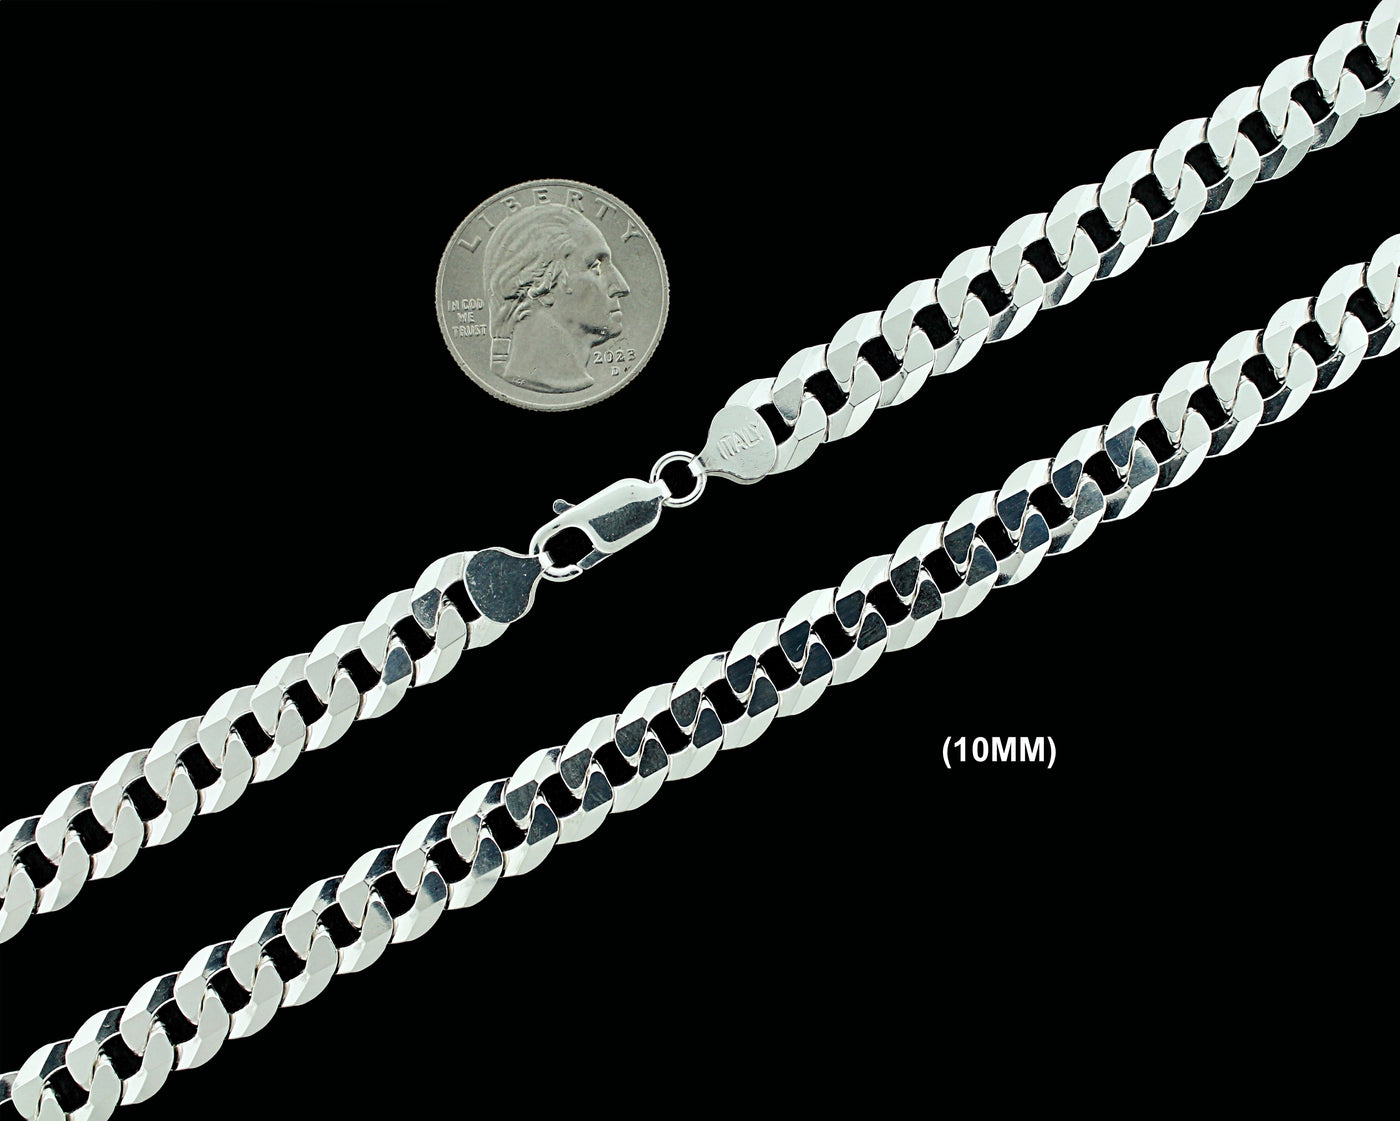 10MM SOLID 925 Sterling Silver Cuban Curb Link Chain Necklace or Bracelet ITALY